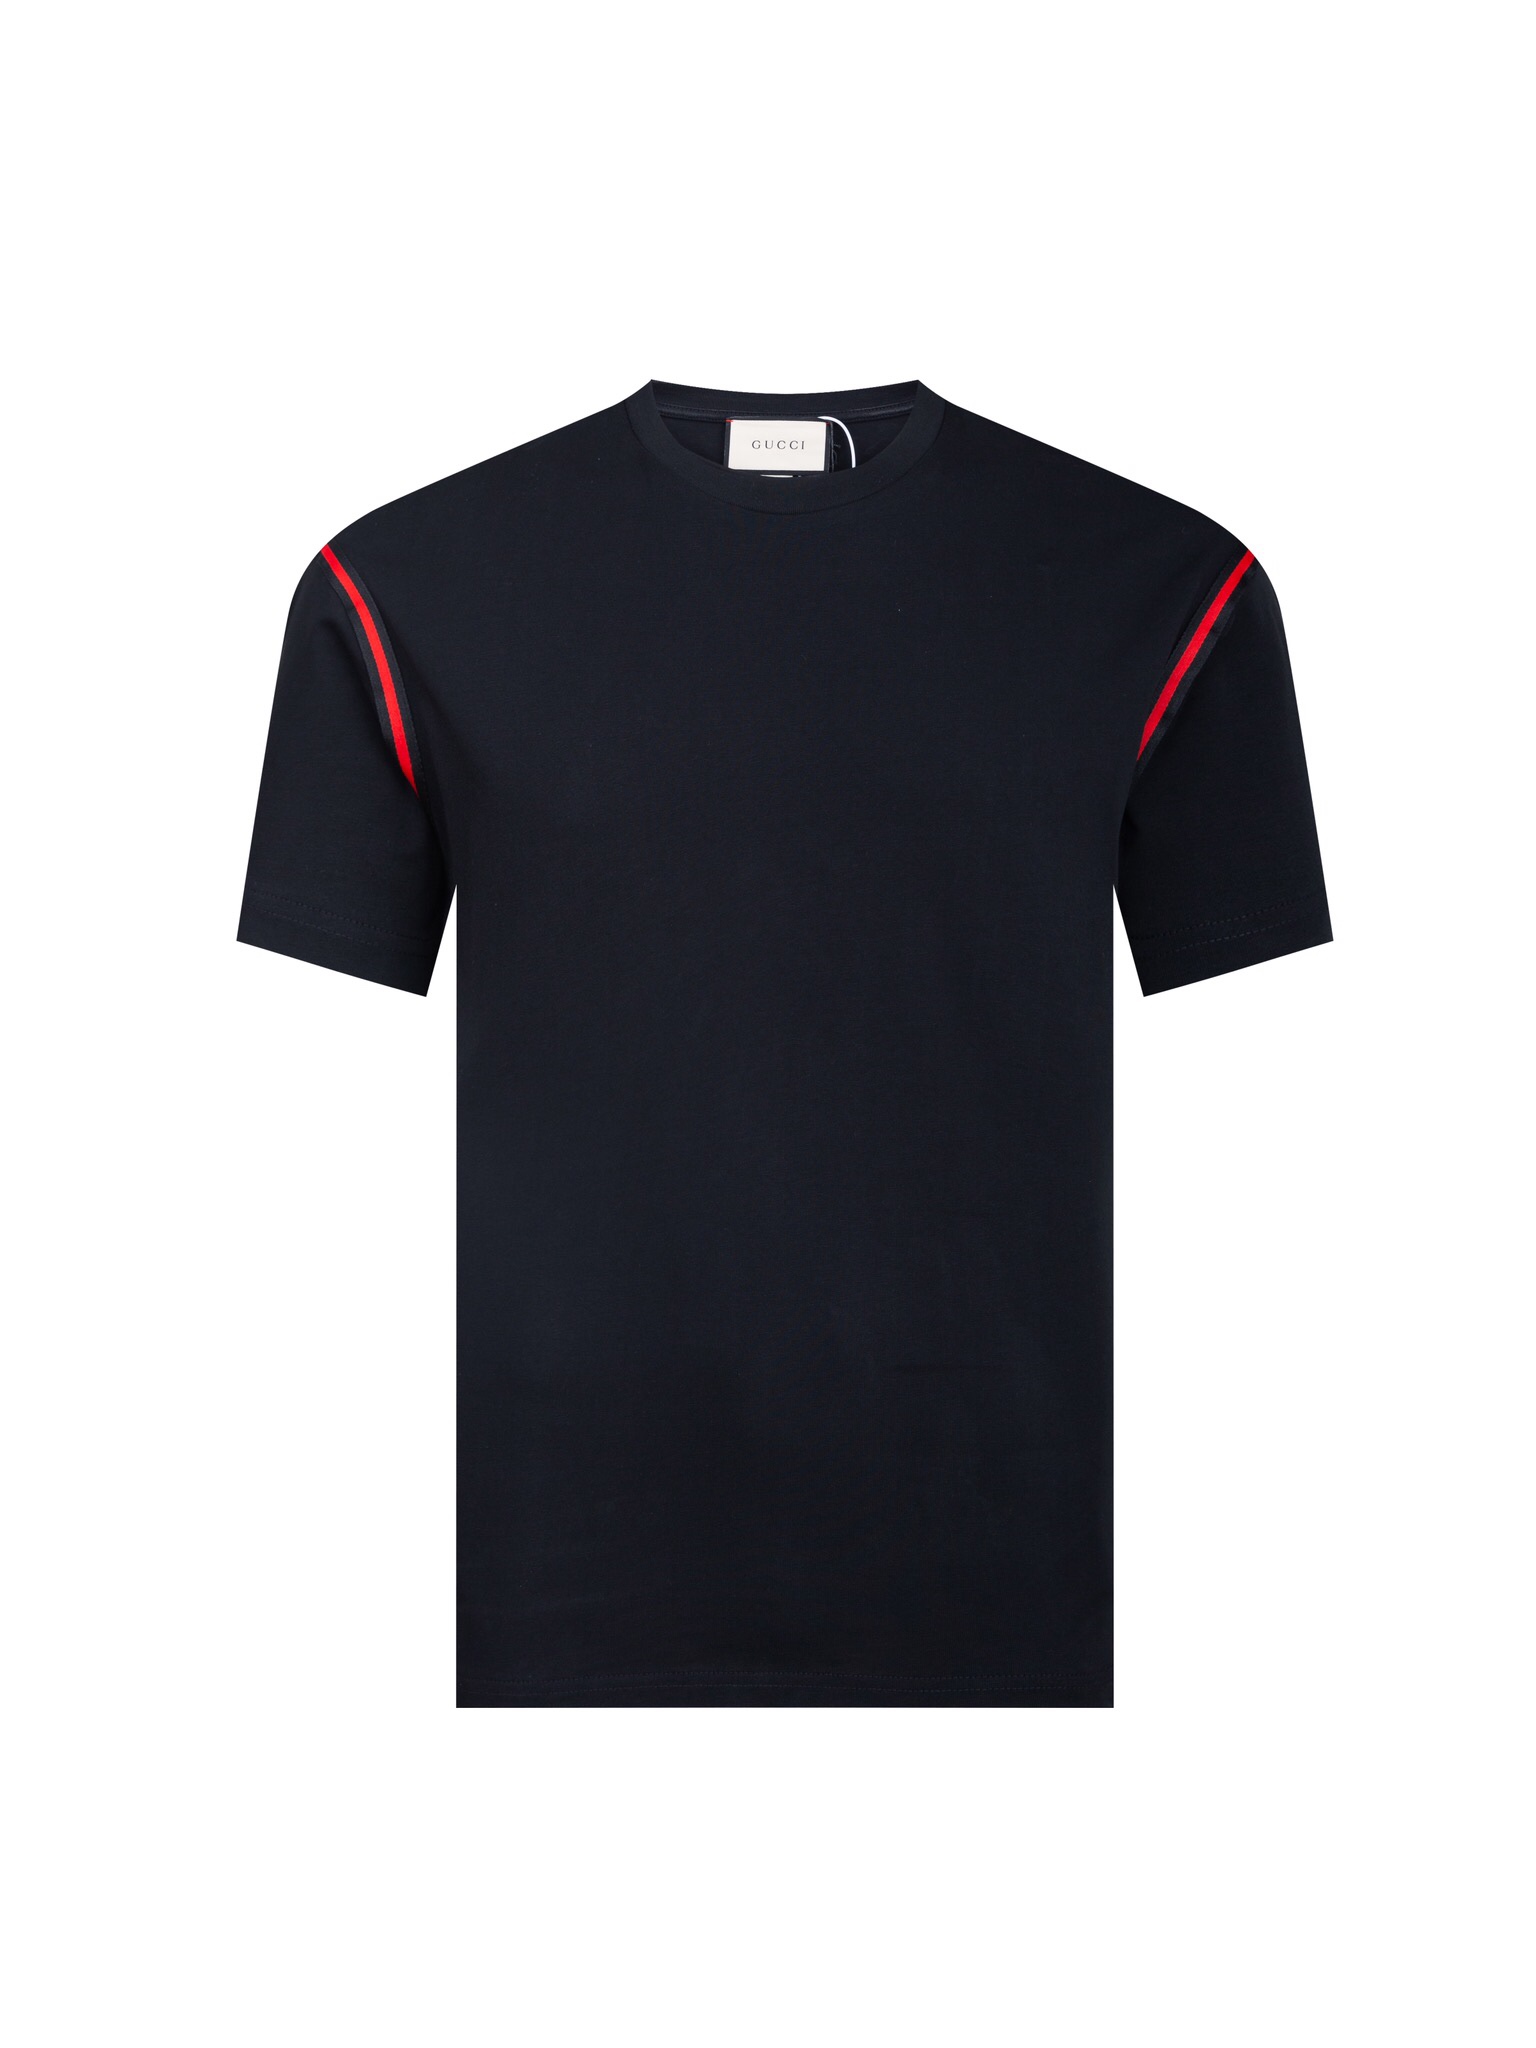 Gucci Replica
 Clothing T-Shirt Black Green Grey Red White Embroidery Unisex Short Sleeve